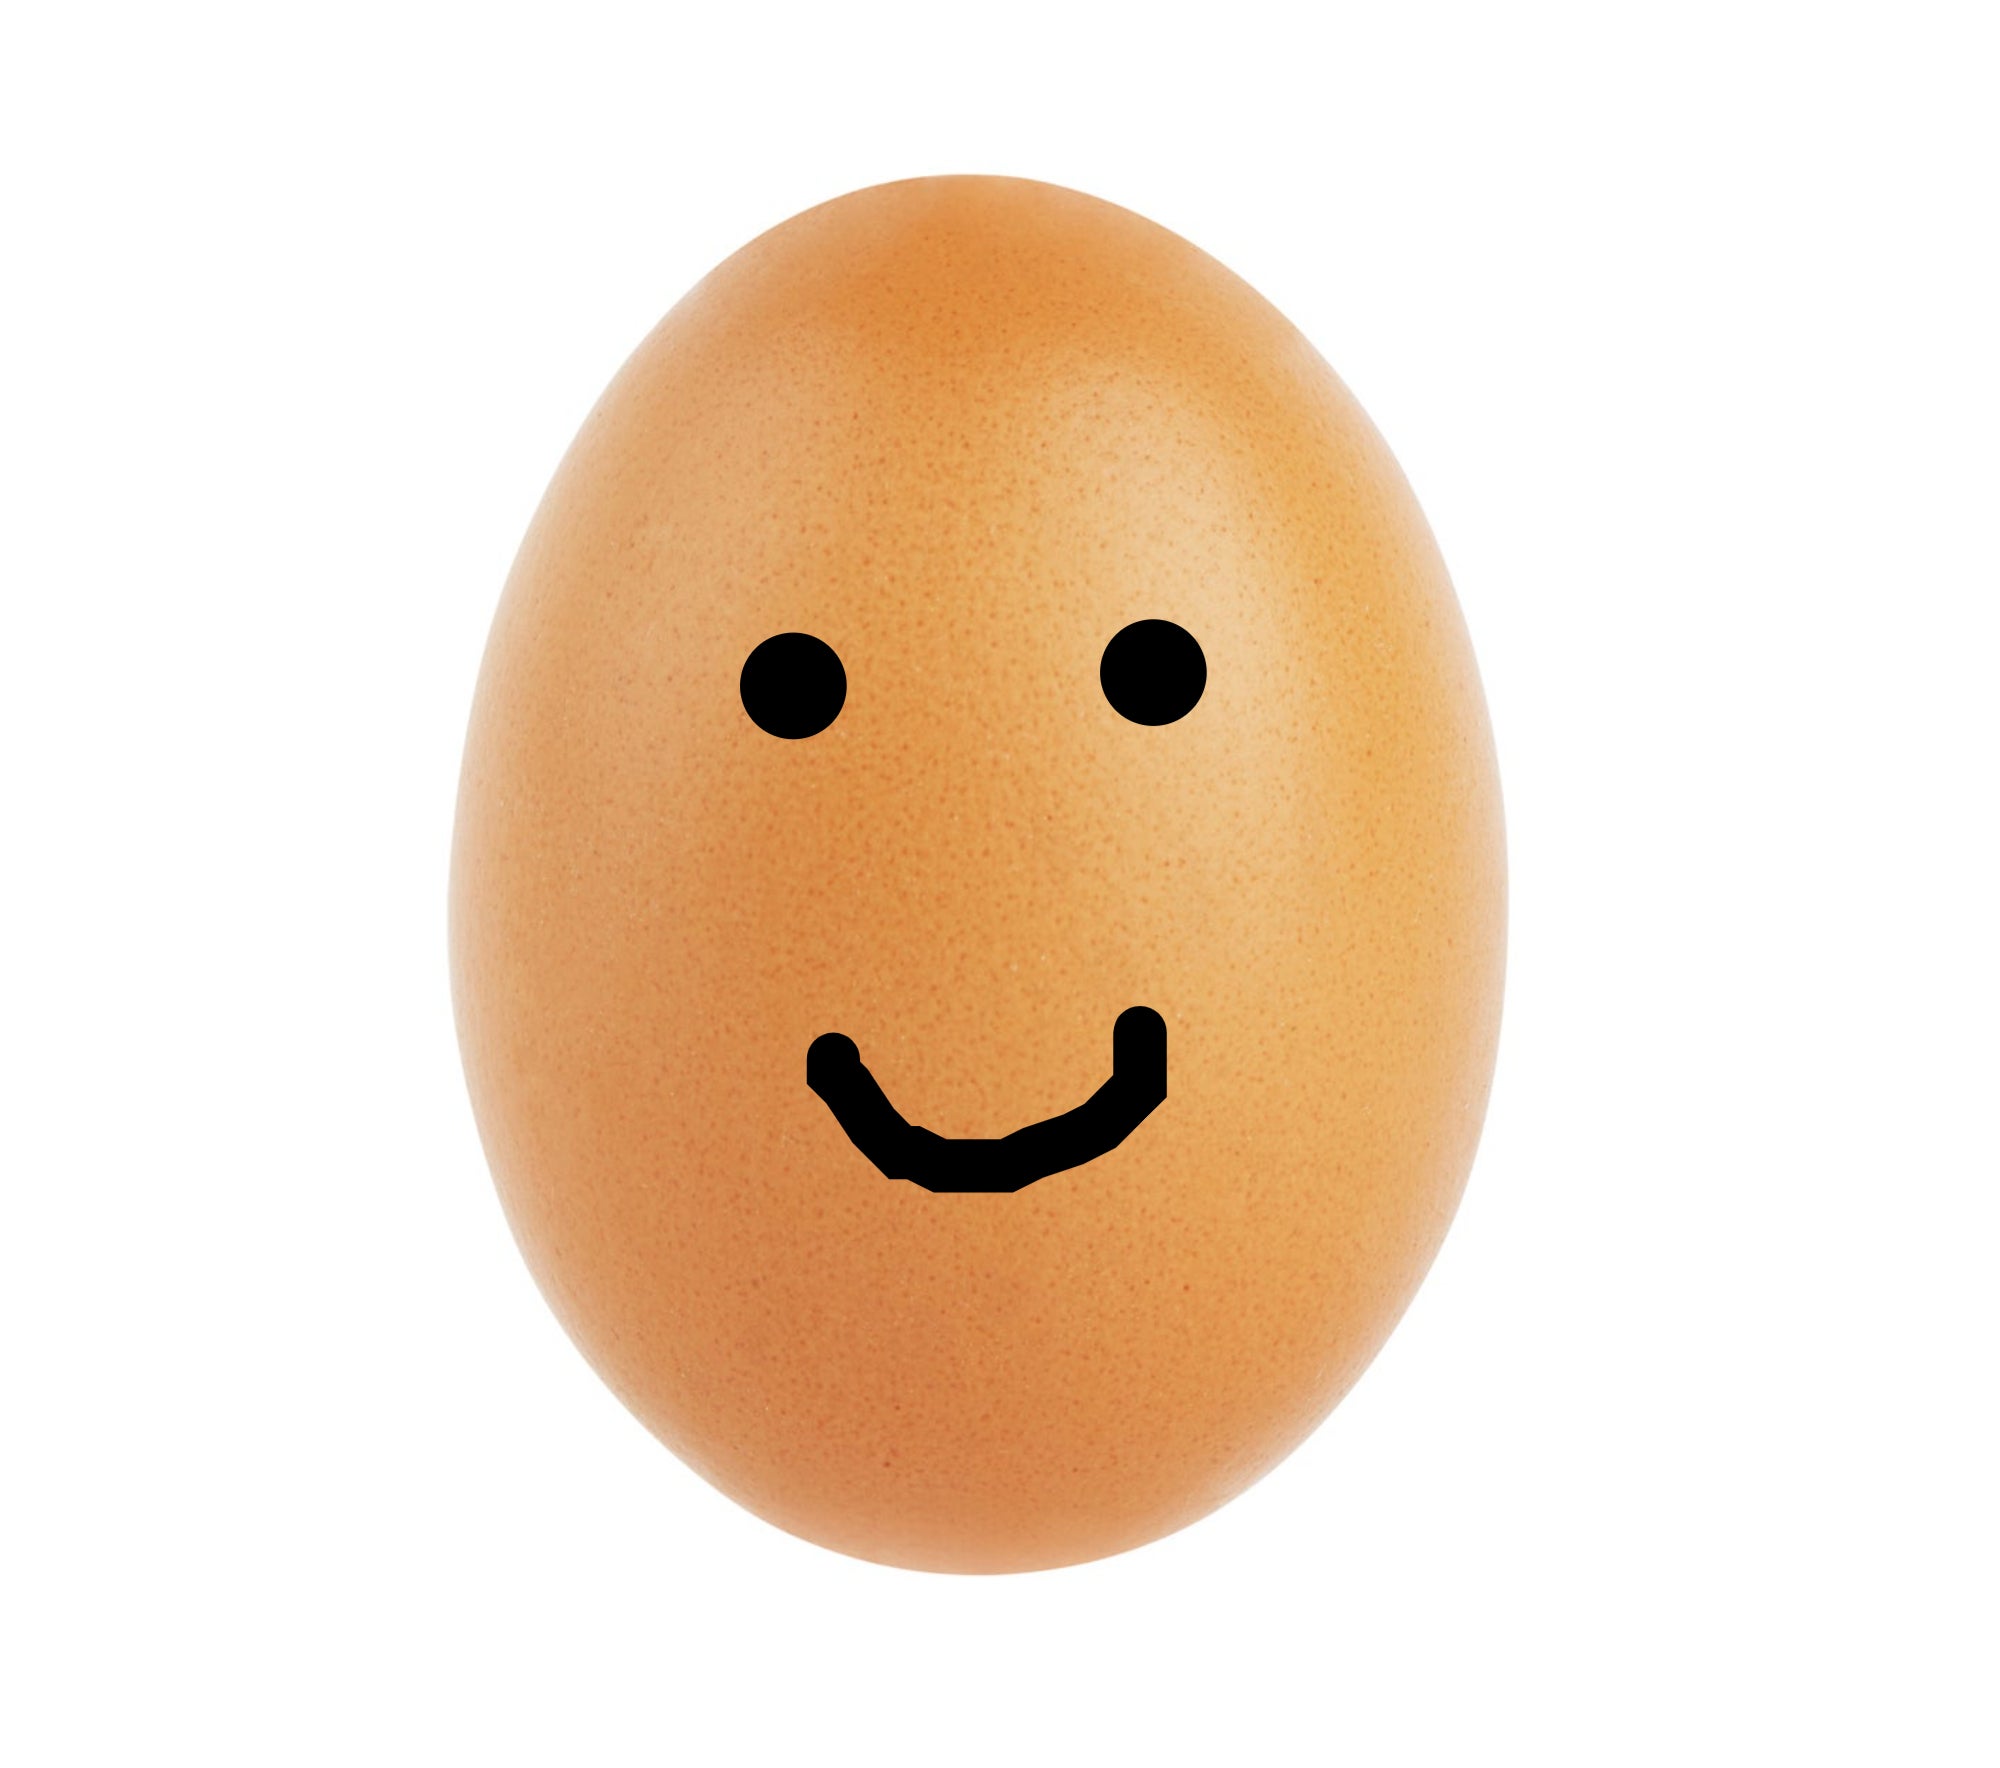 A single brown chicken egg isolated on a white background with a smiley face drawn on